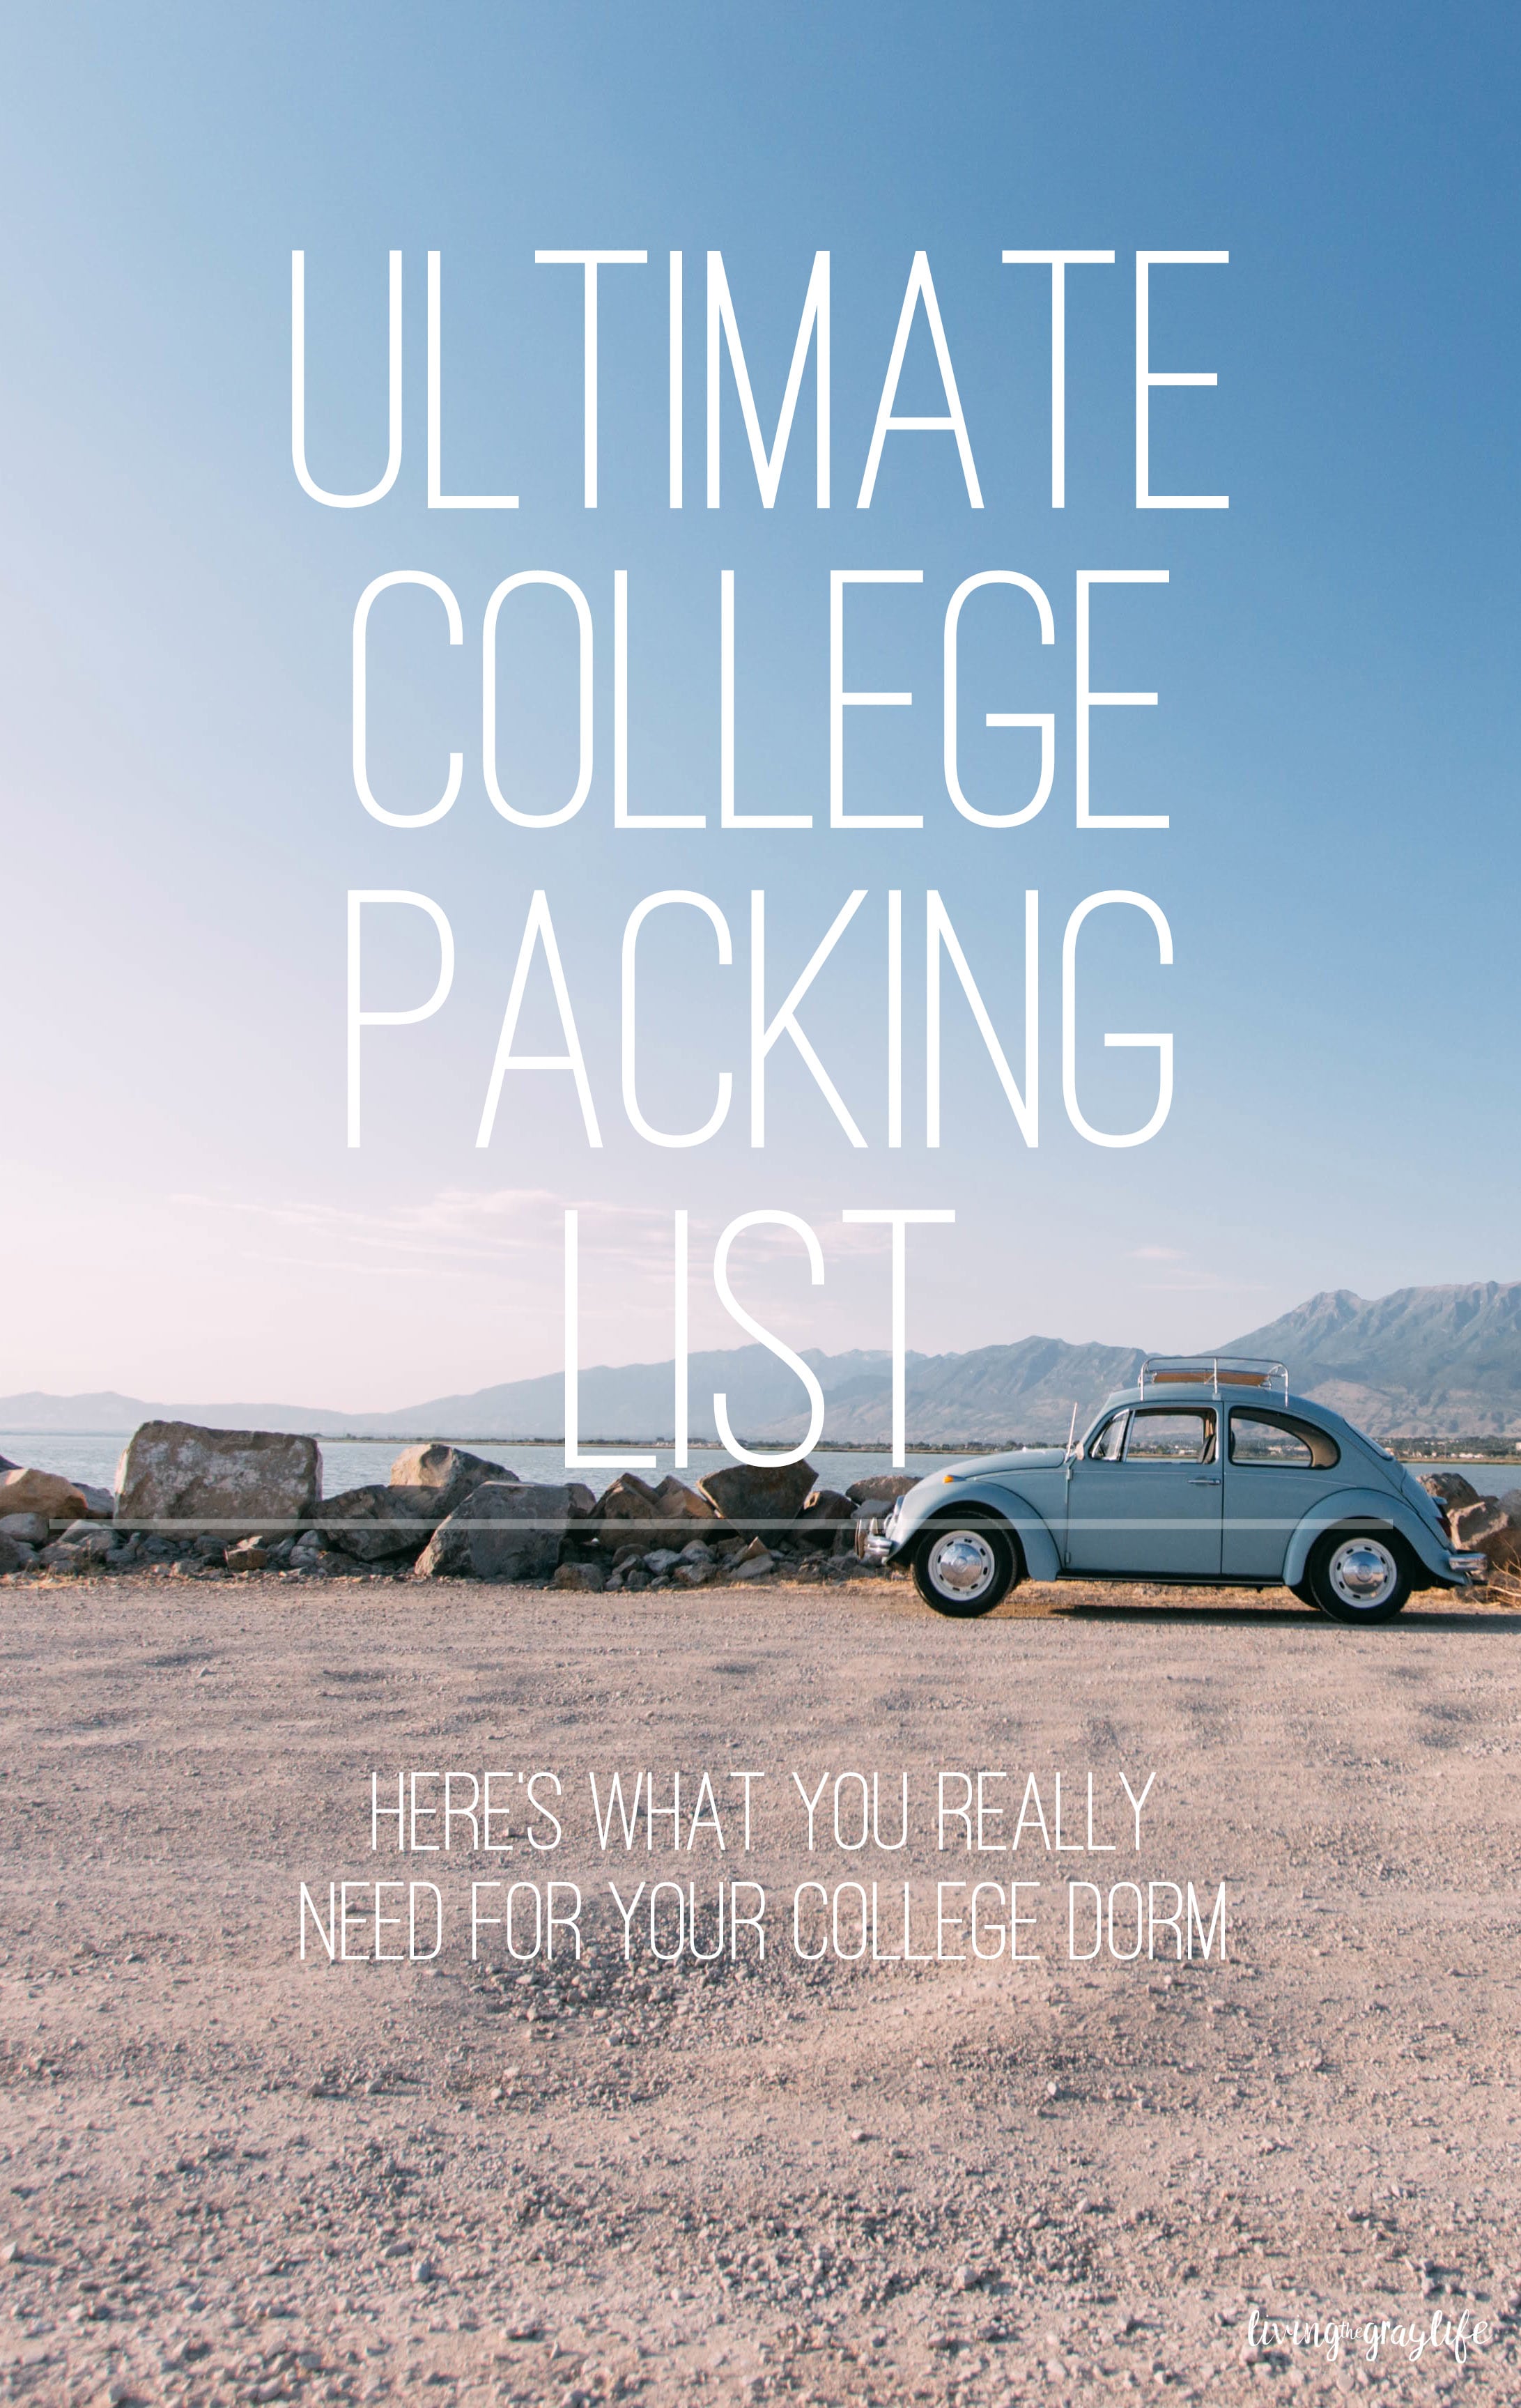 Here's what you actually need to pack for your college dorm! Ultimate college packing list.